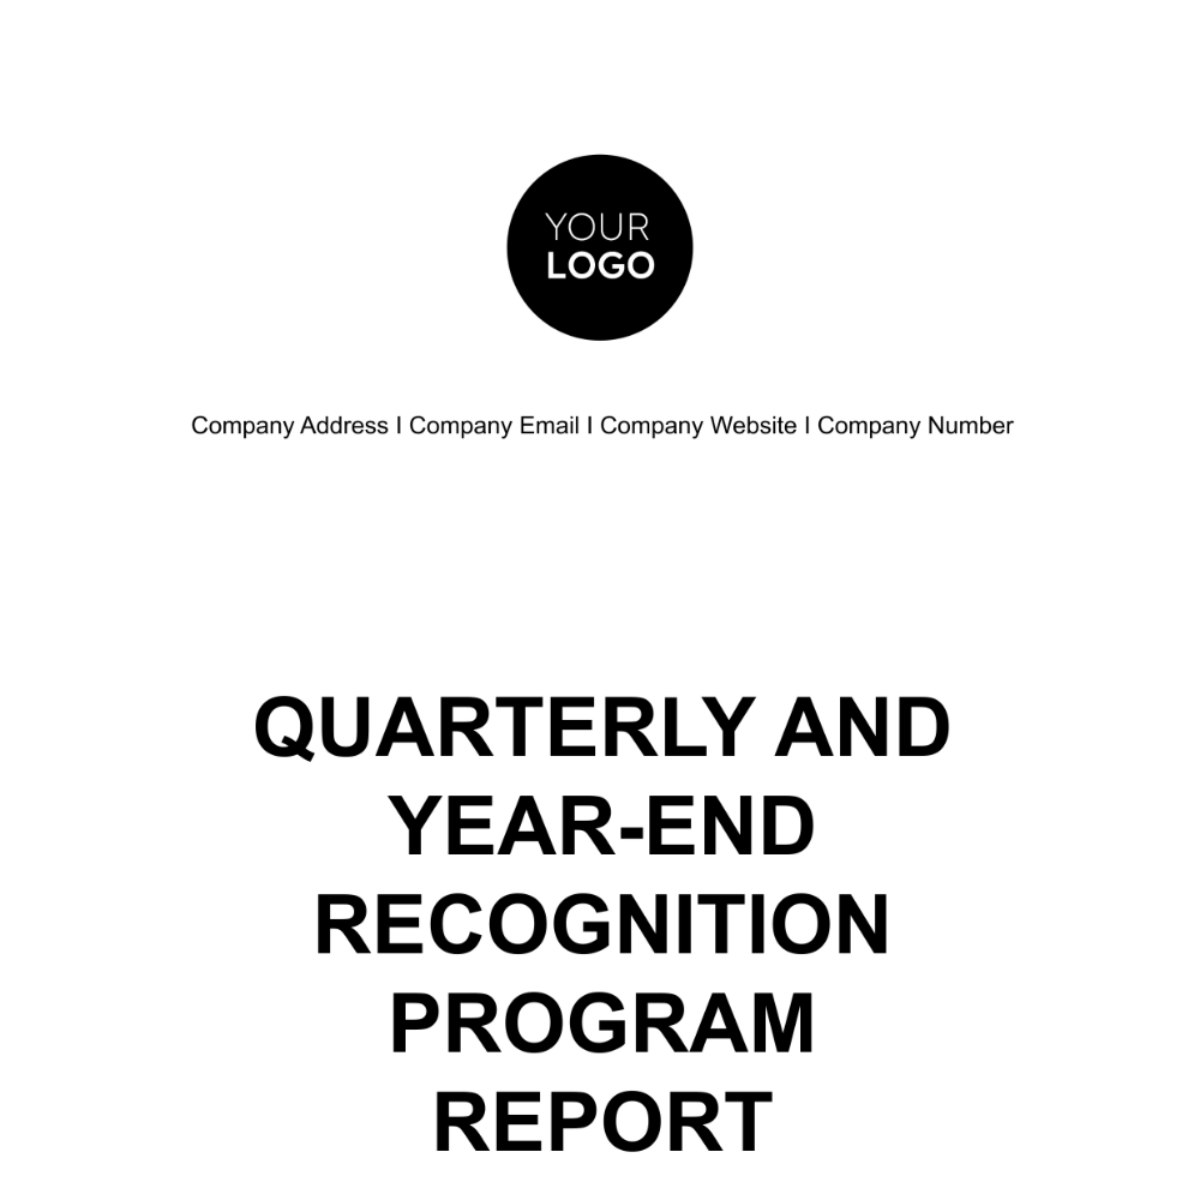 Quarterly and Year-end Recognition Program Report HR Template